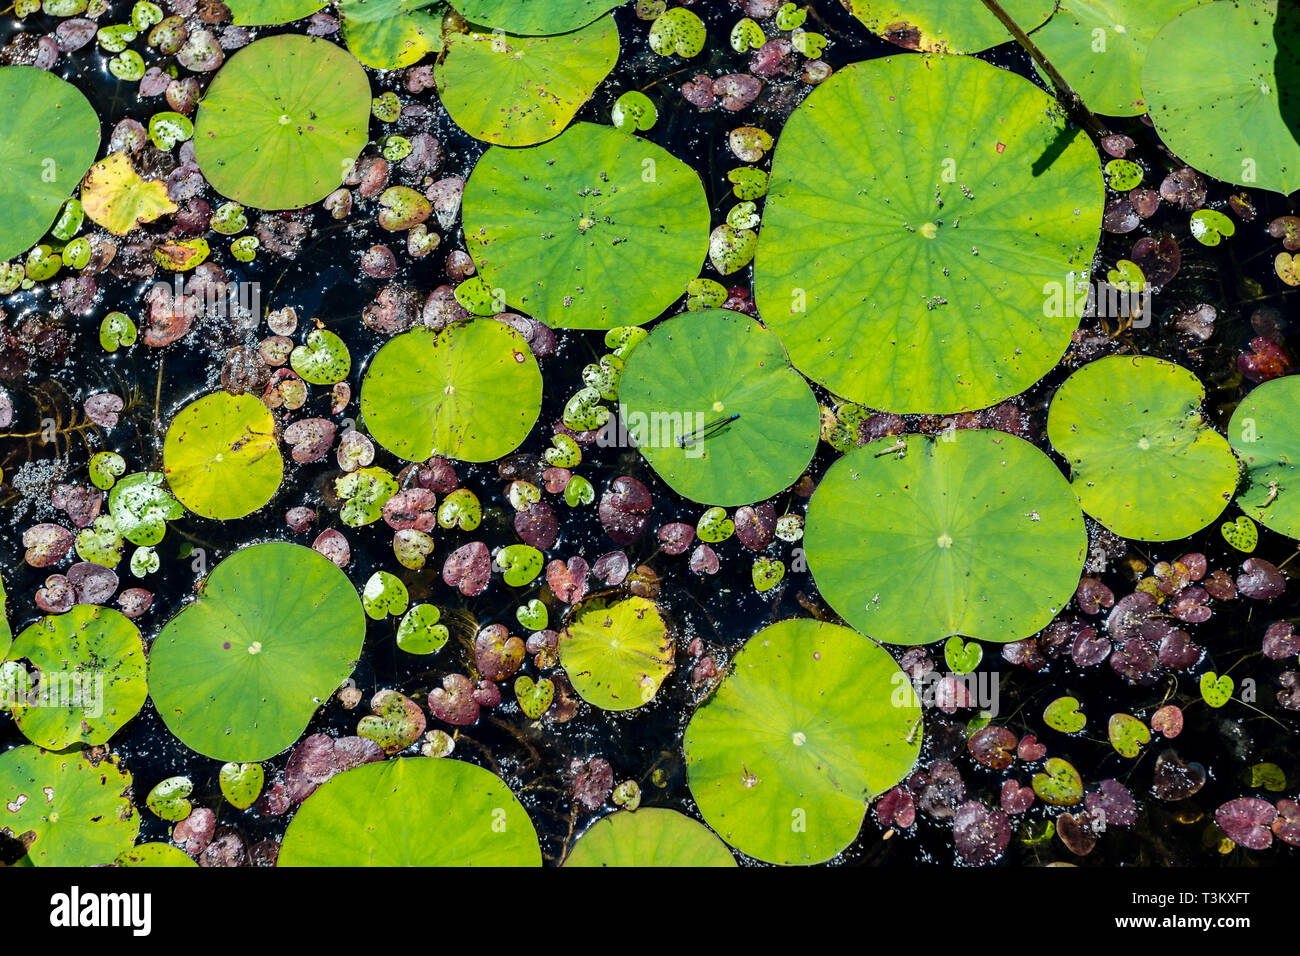 Dragonfly sitting on the lily pads. Pond in a sunny summer day. Stock Photo